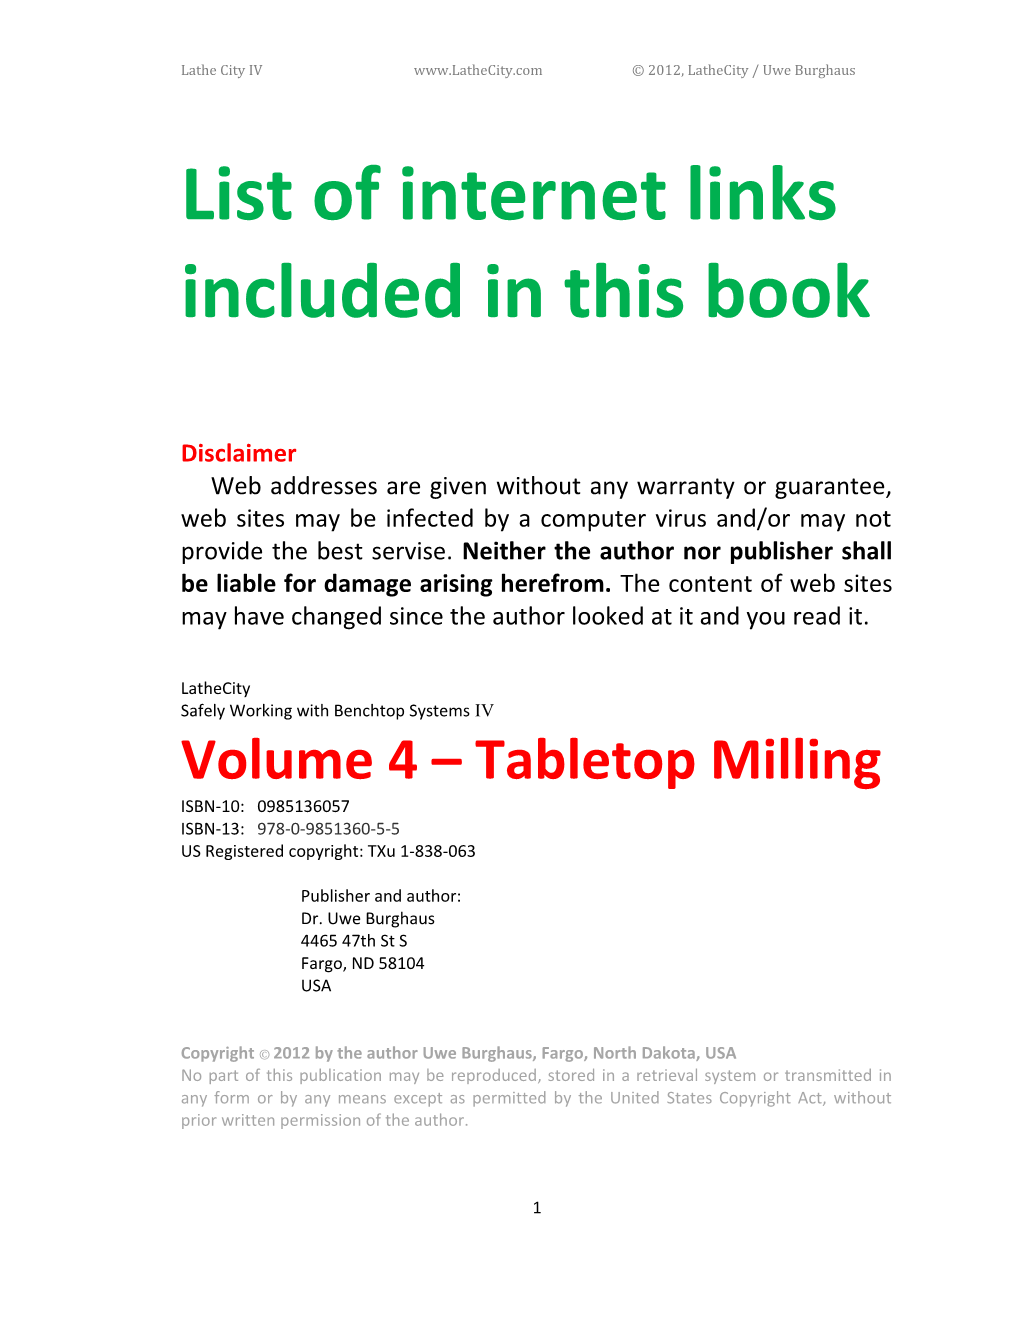 List of Internet Links Included in This Book